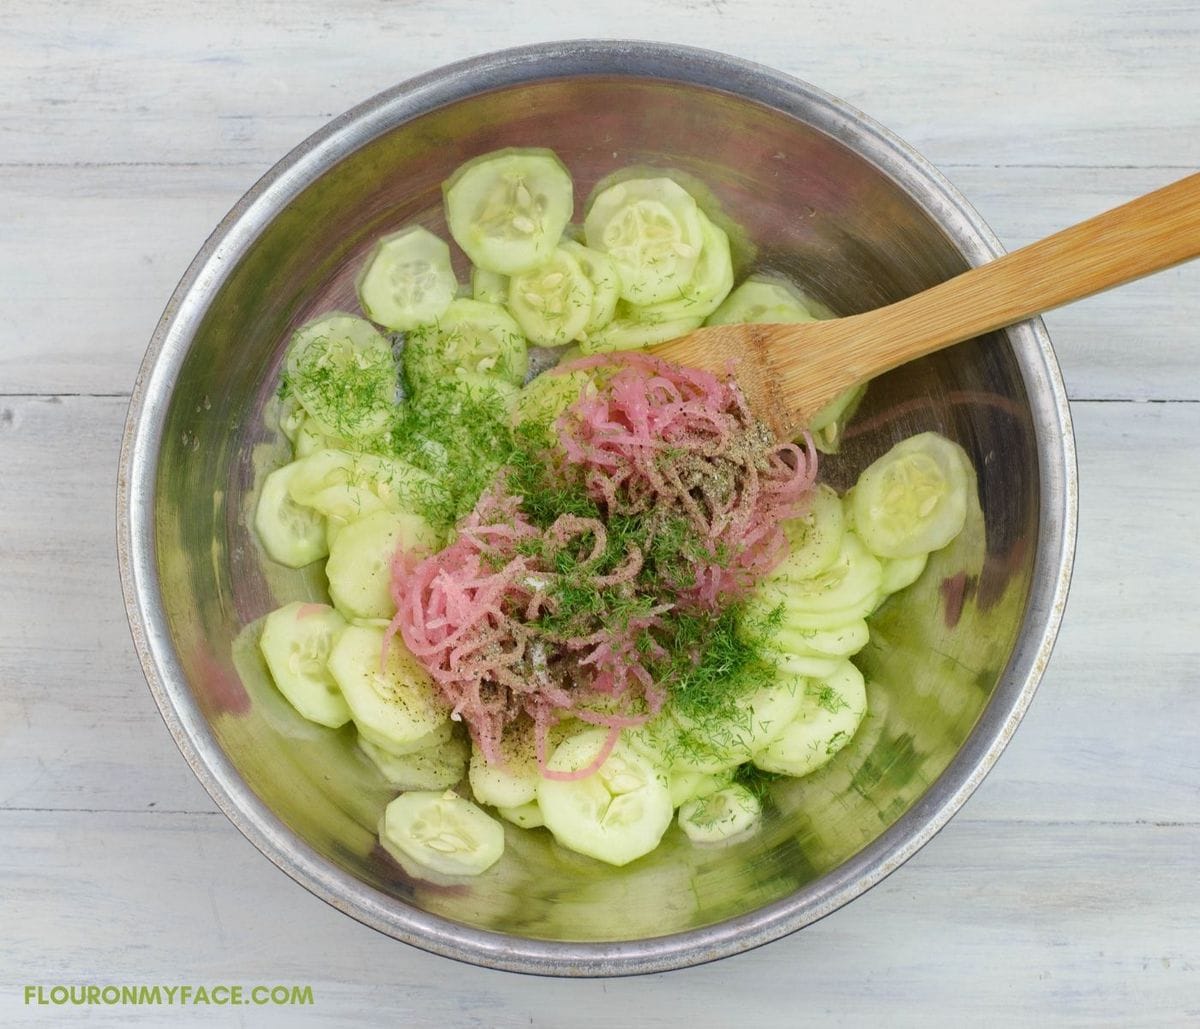 Combining Cucumber Salad ingredients in a mixing bowl.